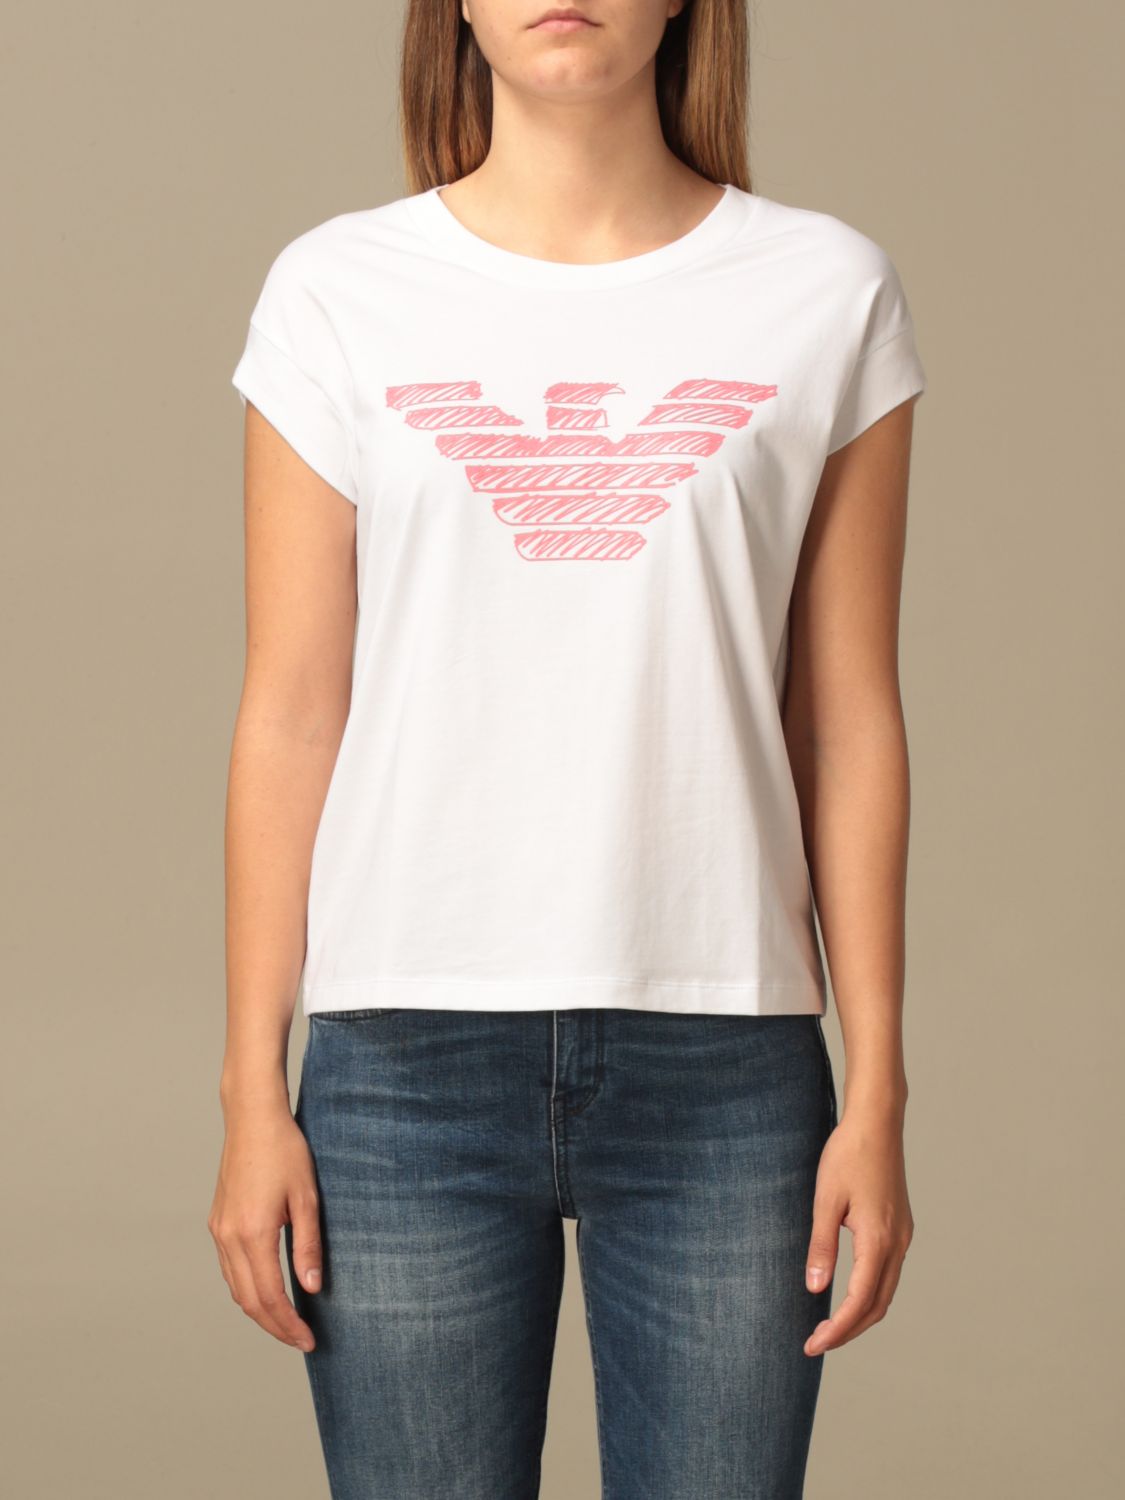 Emporio Armani T Shirt Women Online Discounted, Save 60% 